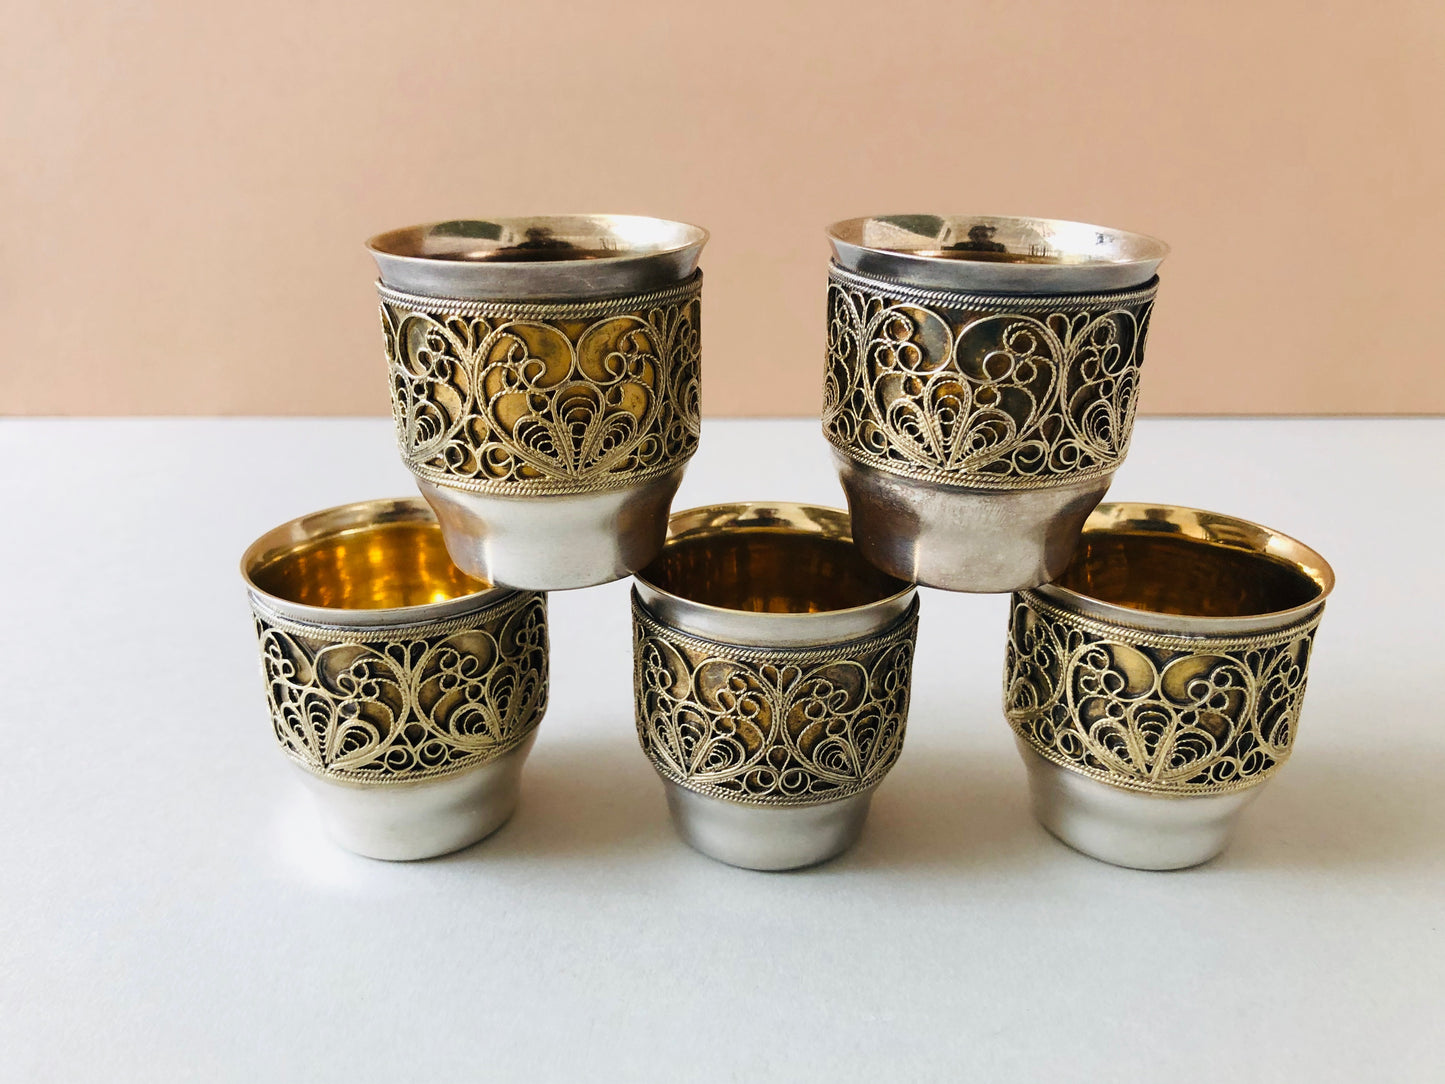 Master Beccy - Filigree Decorated Sliver Cup